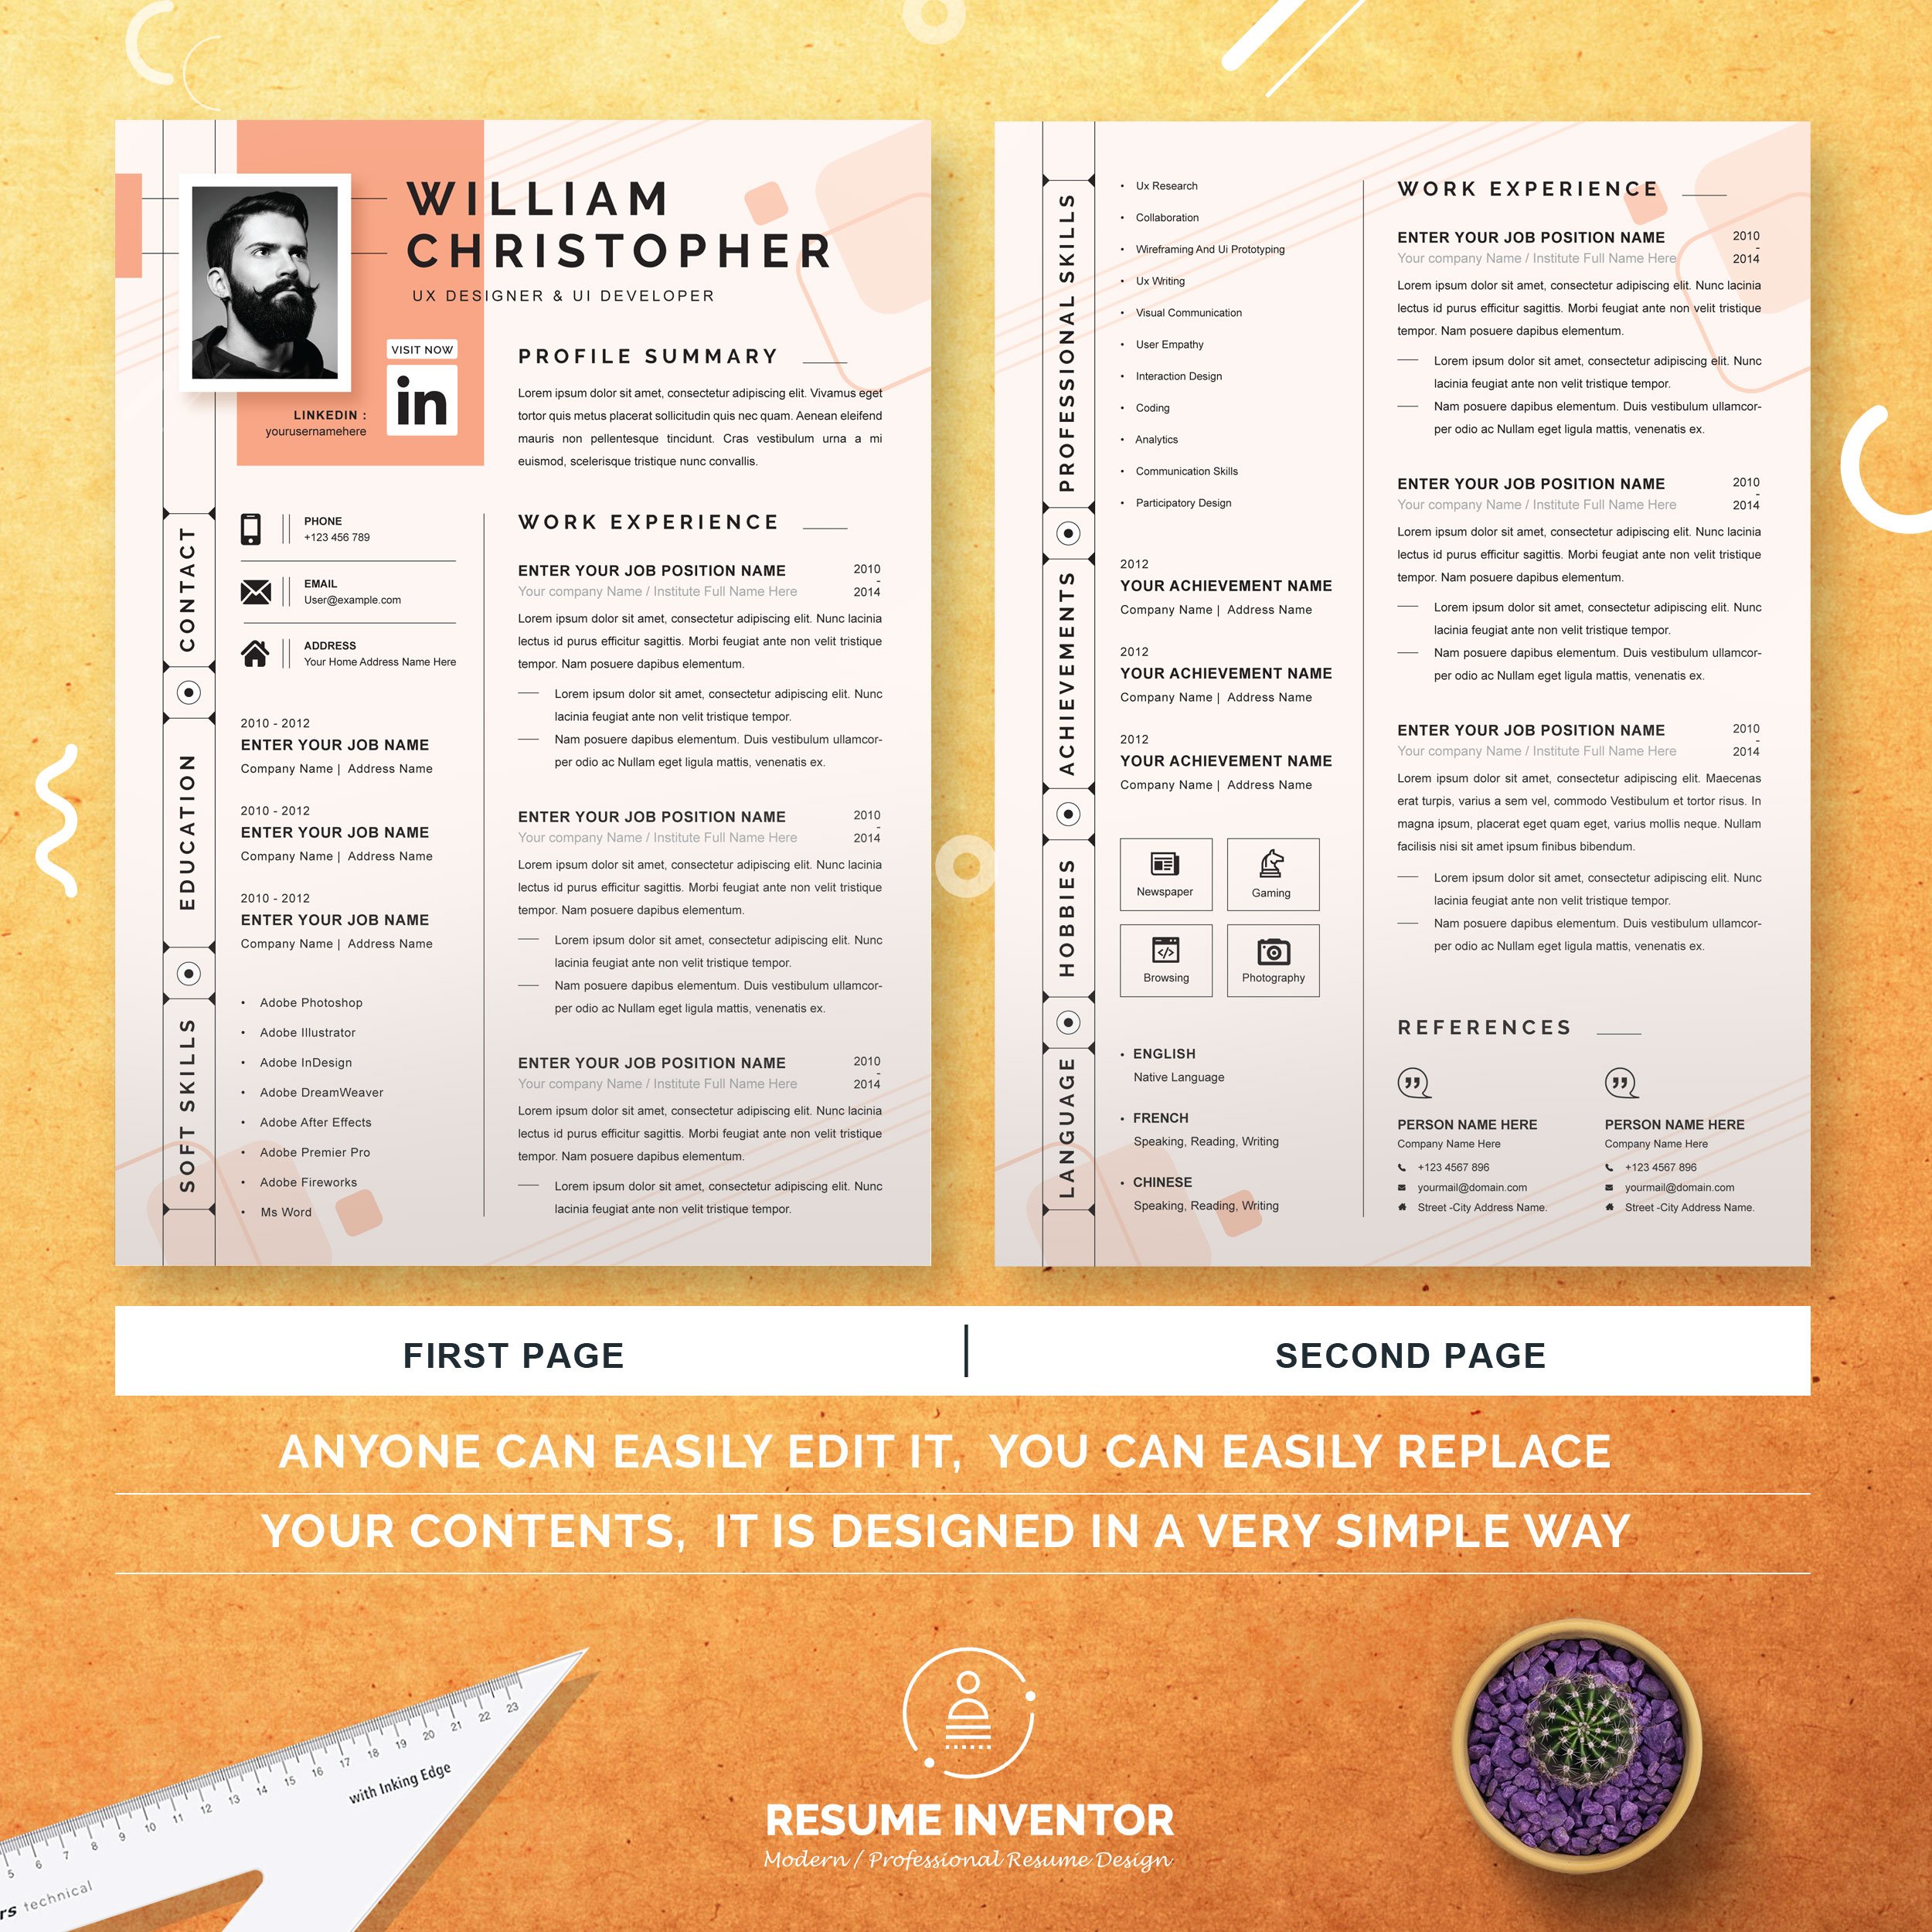 CV Template, Professional Resume preview image.